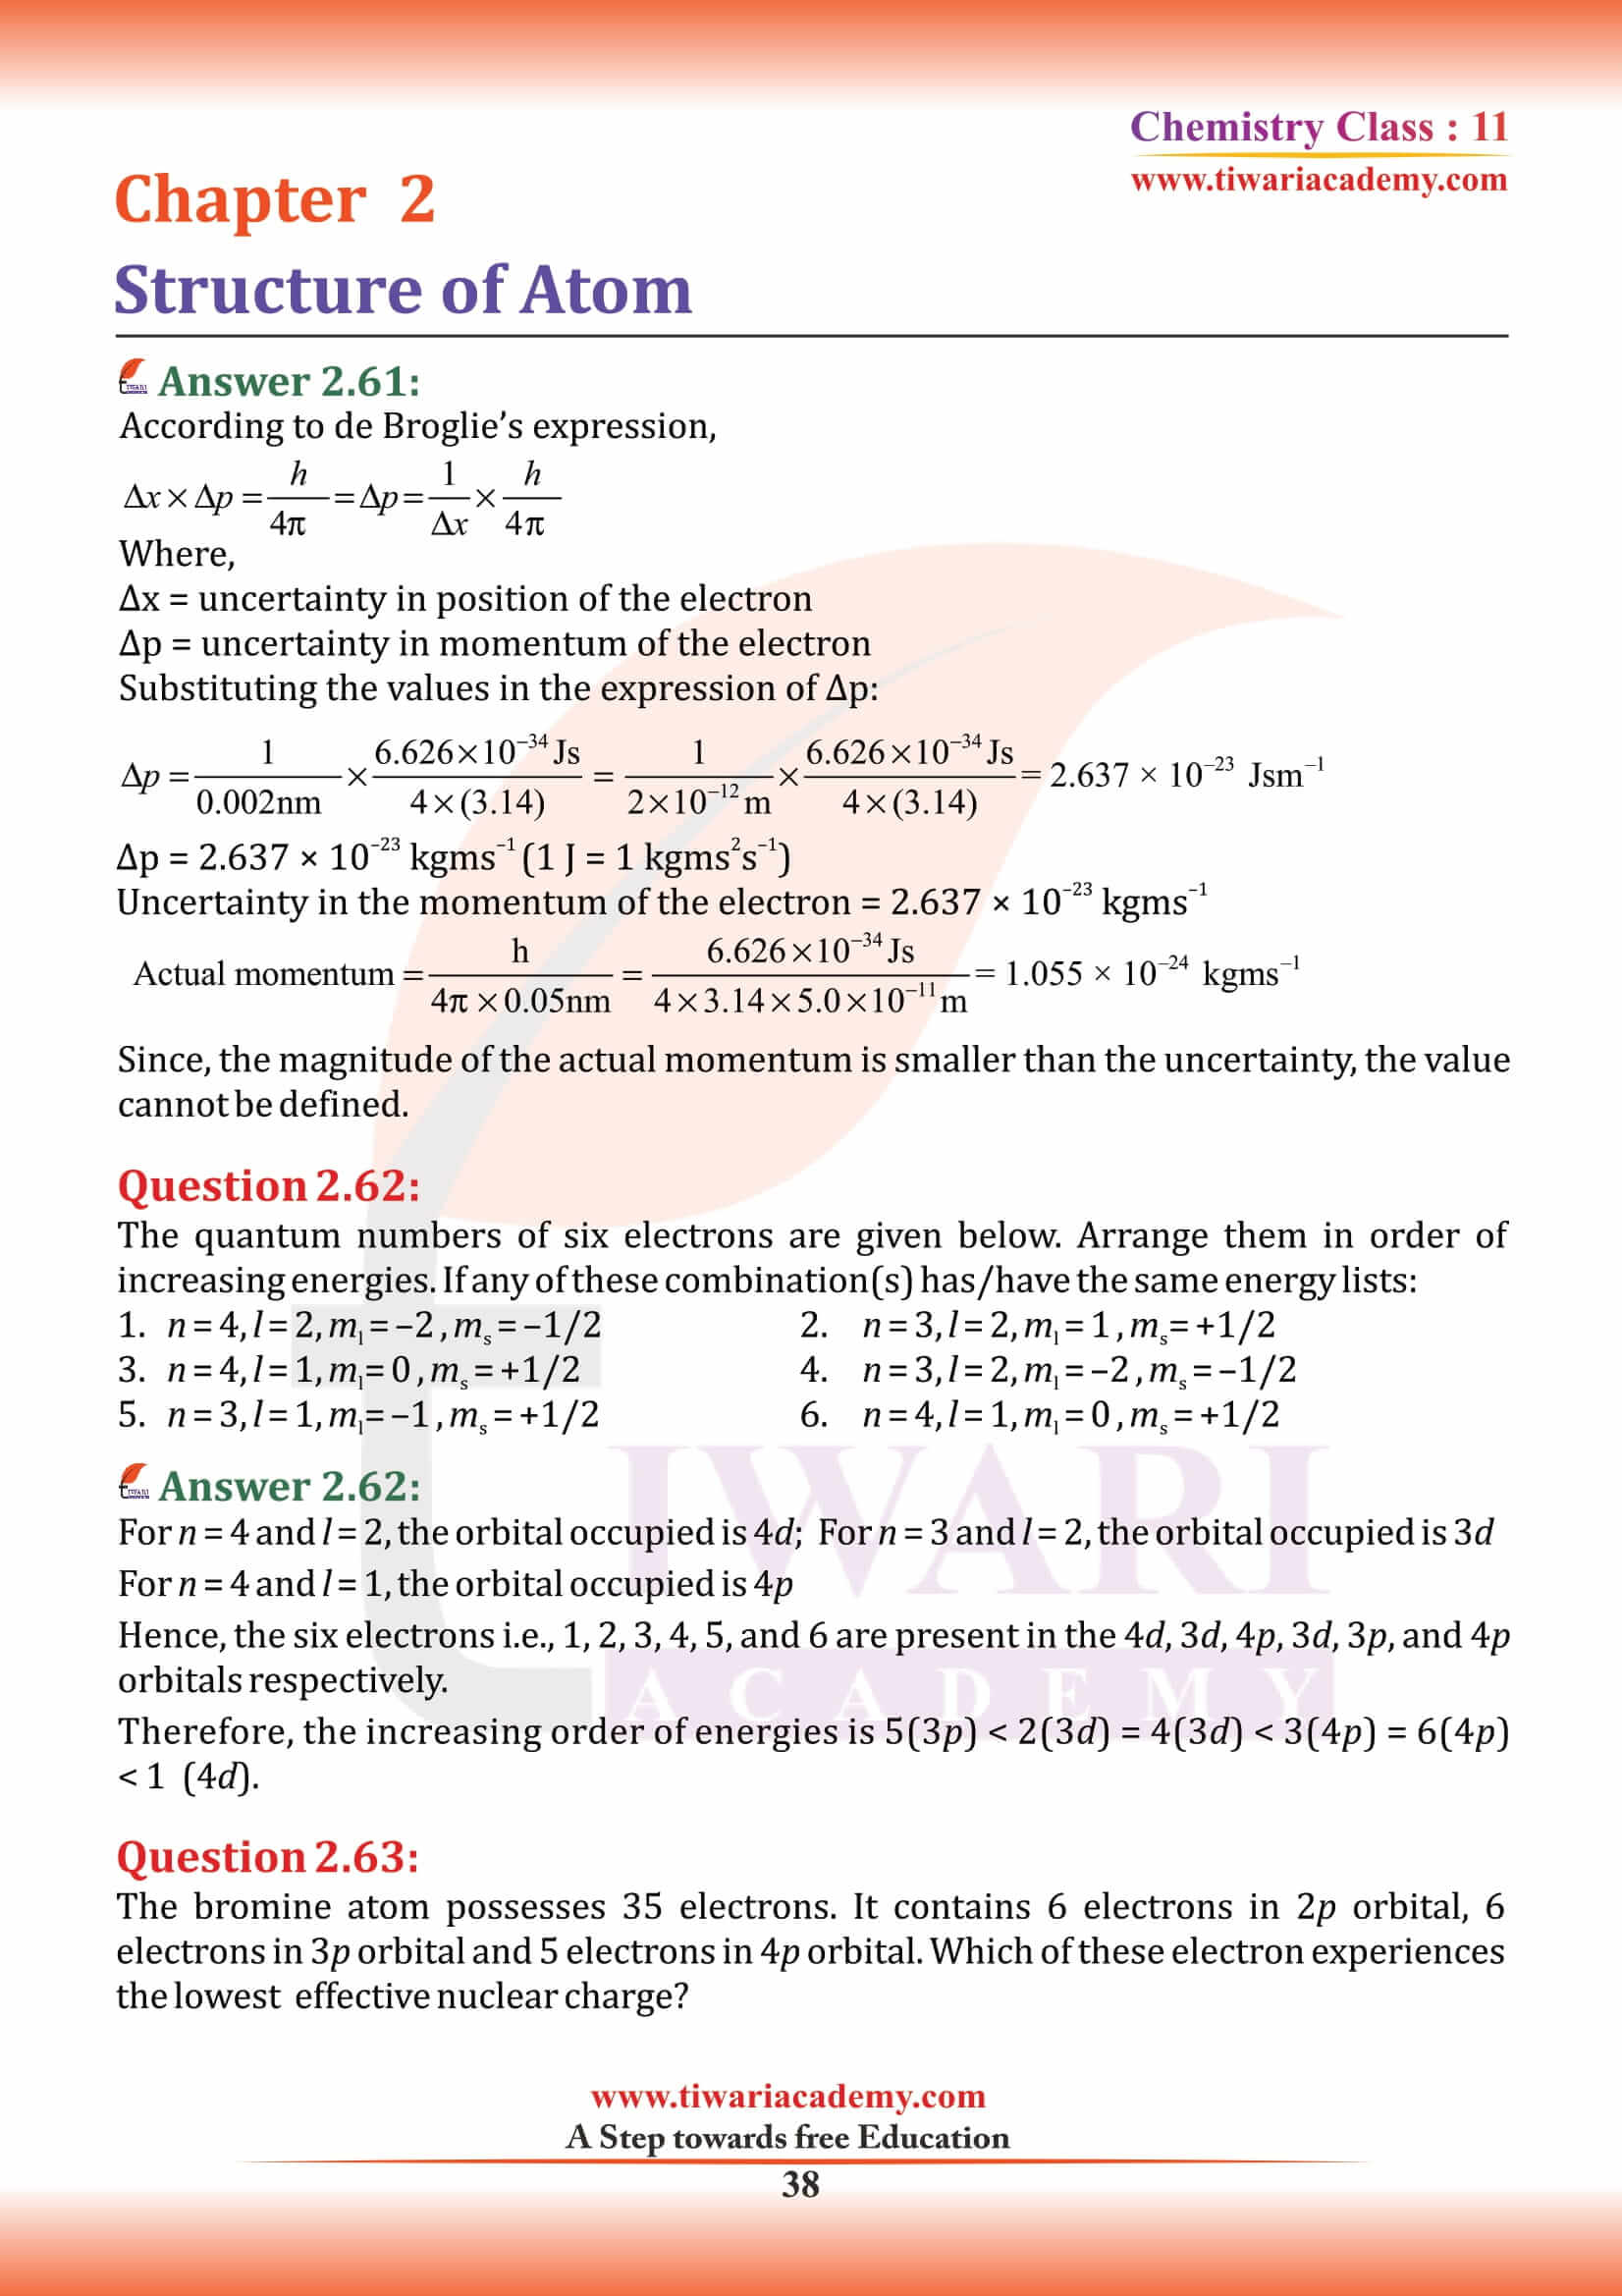 Class 11 Chemistry Chapter 2 revision books